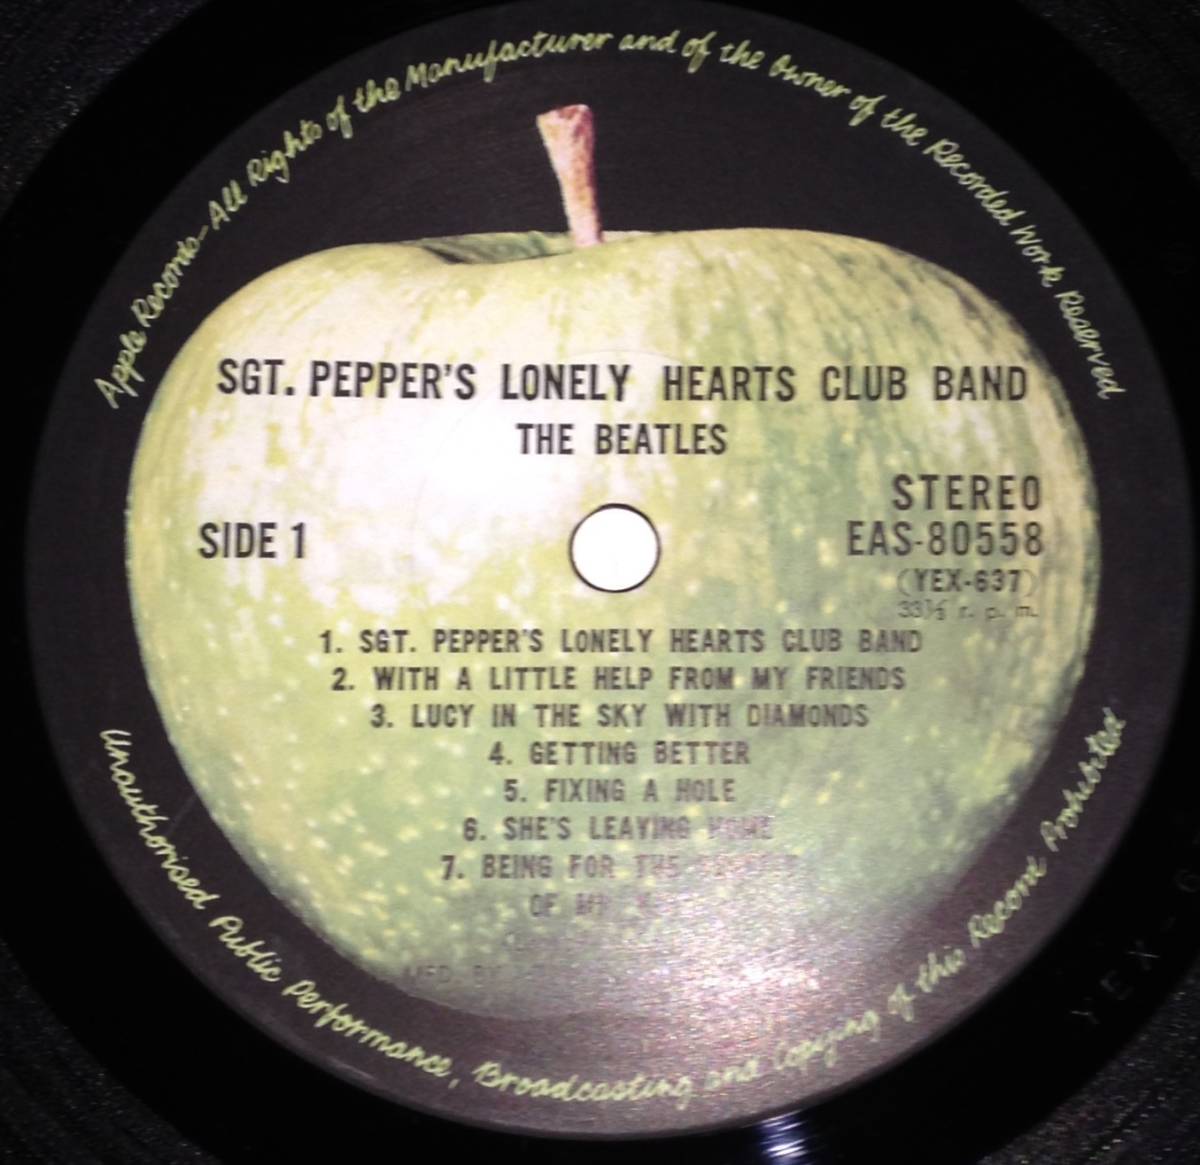 【LP】THE BEATLES / SGT. PEPPERS LONLY HEATS CLUB BAND_画像6